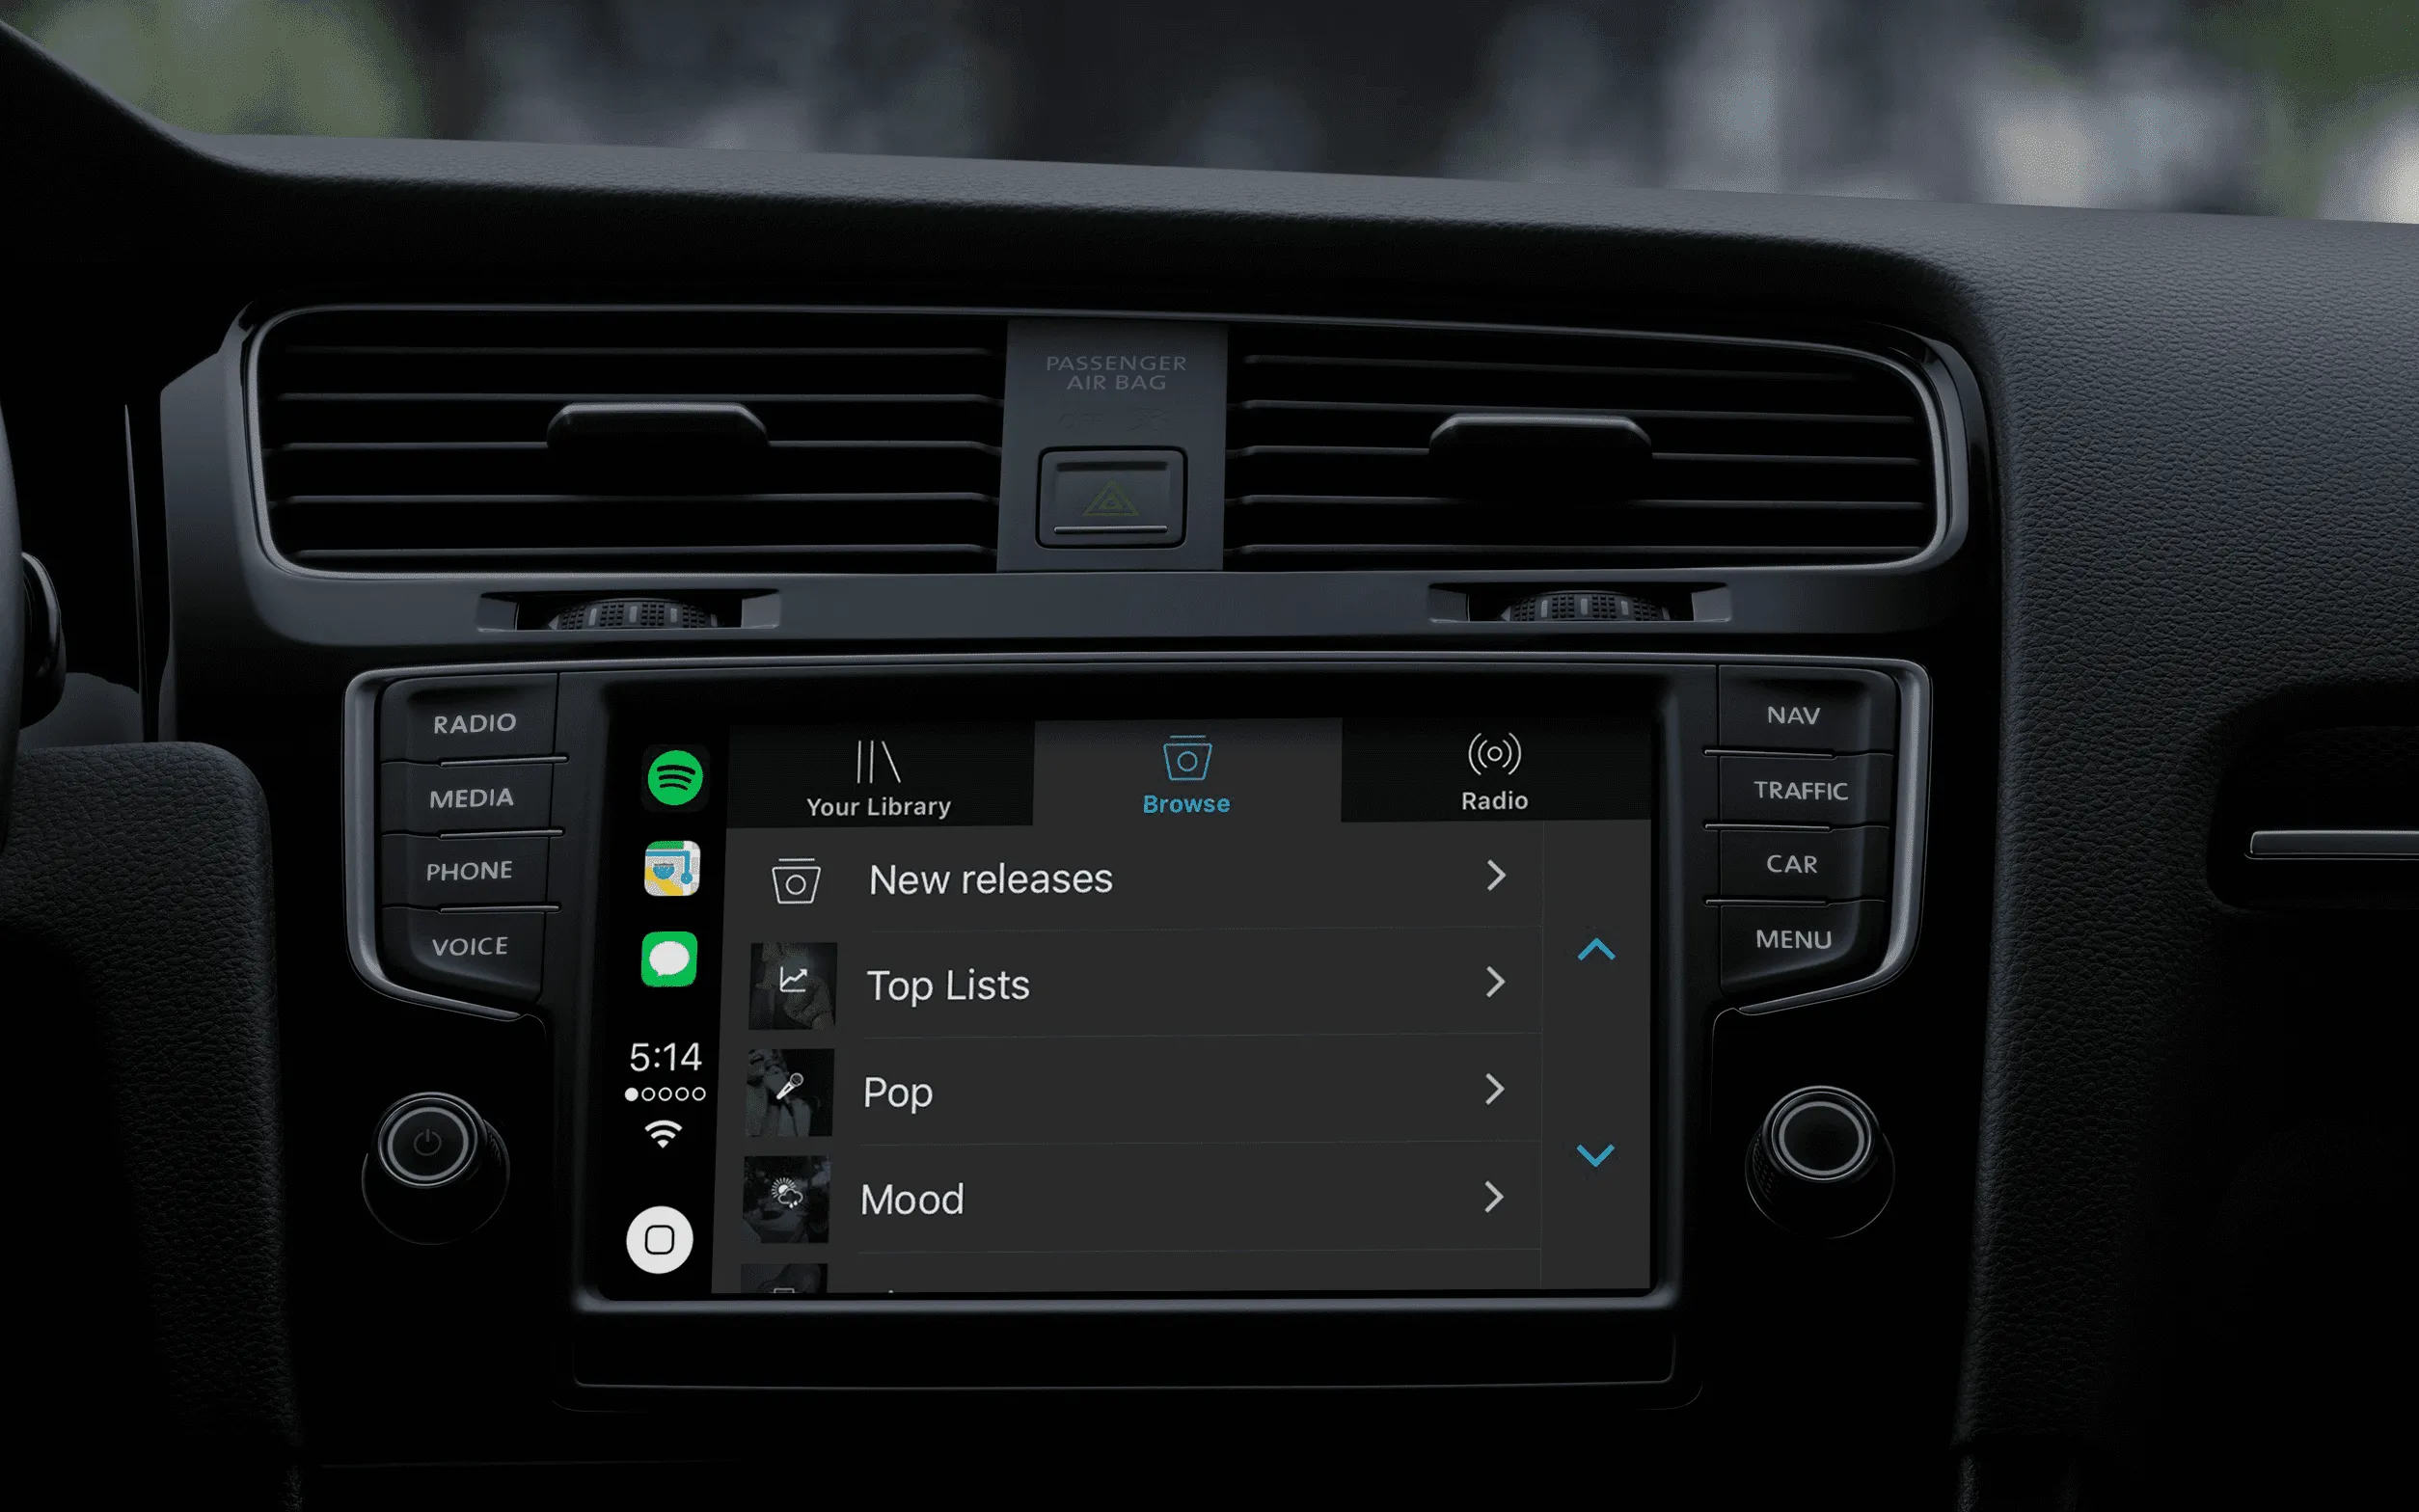 Apps supported by apple CarPlay: Spotify